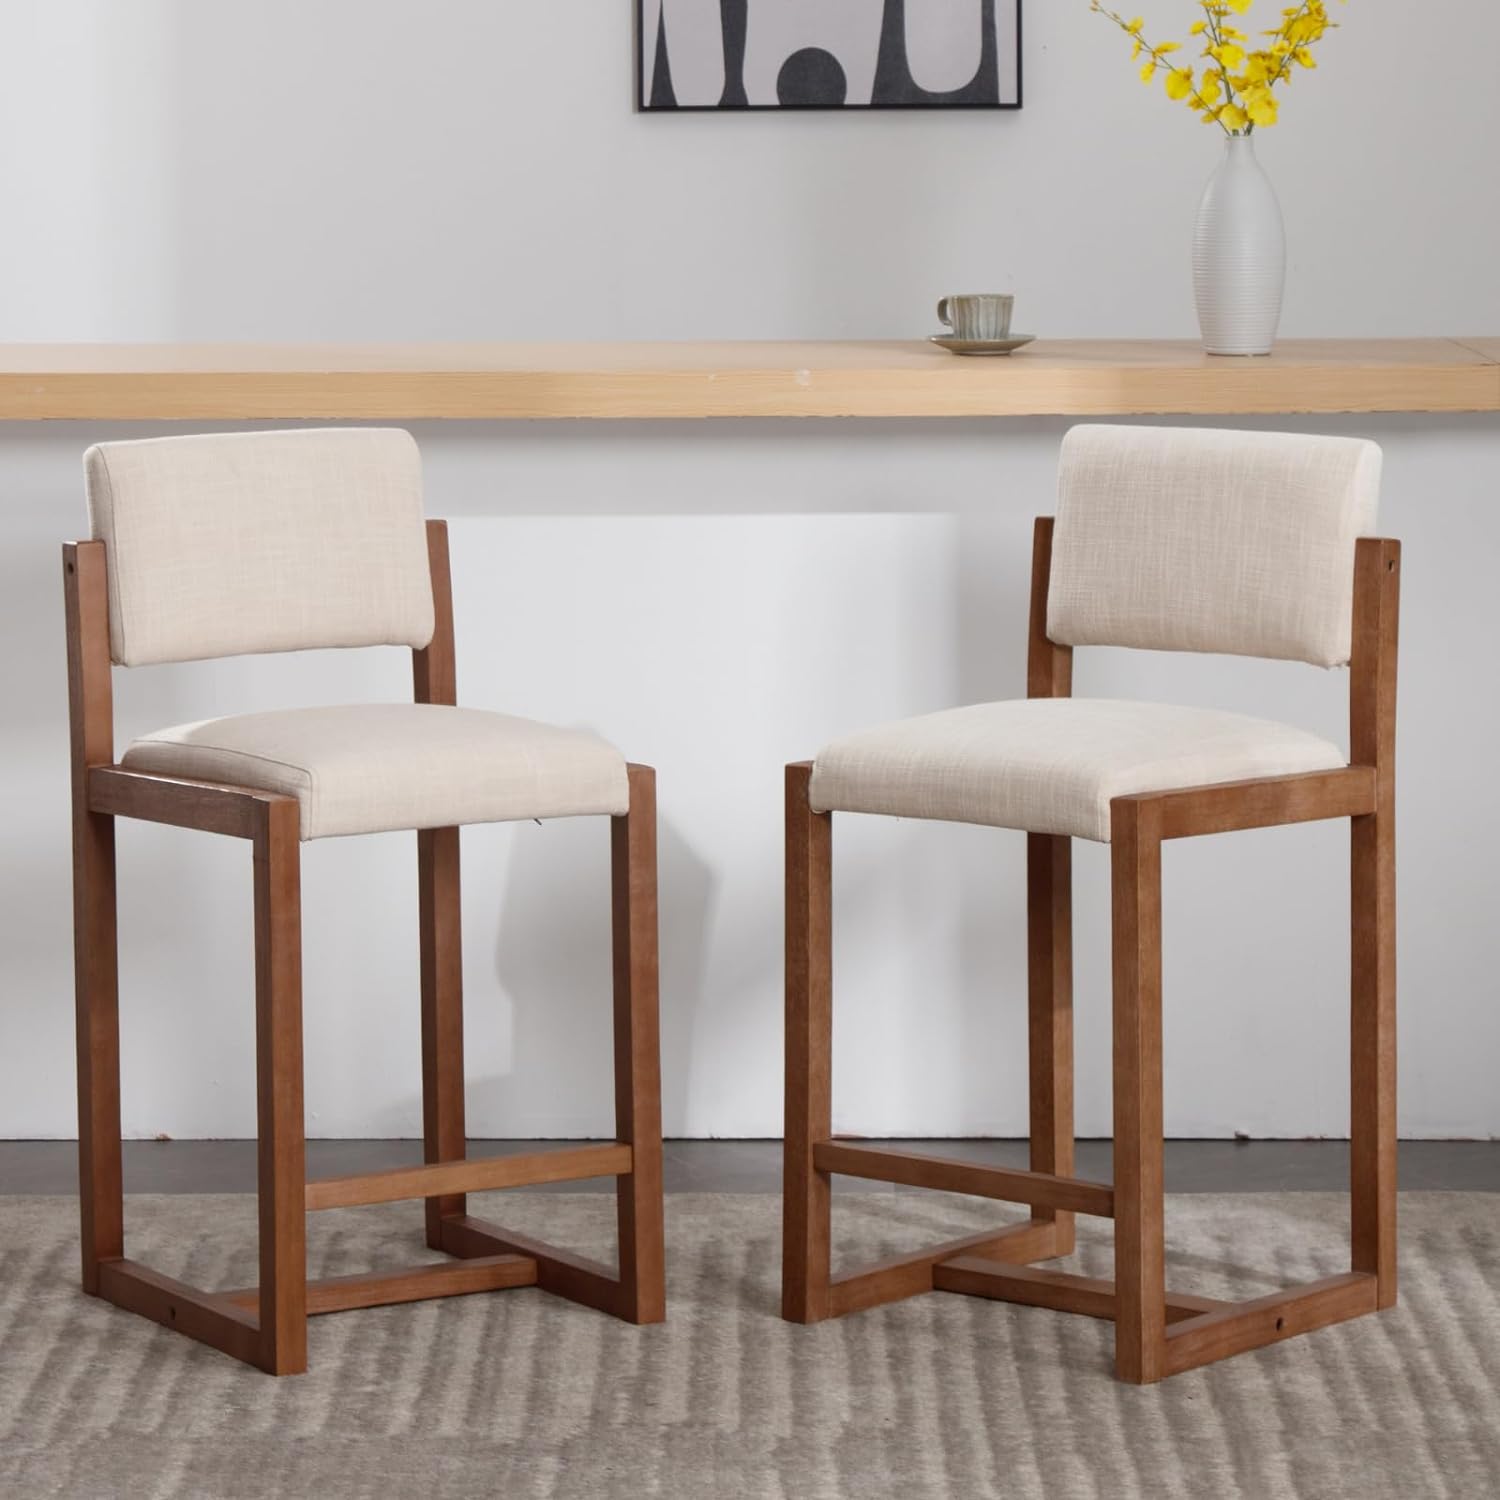 The frame is made of solid wood and is very sturdy. The chairs look really beautiful too and they are reasonably comfortable to sit on. It could be a little demanding to assemble a pair at the same time though (if you have a power screwdriver make sure to use it).